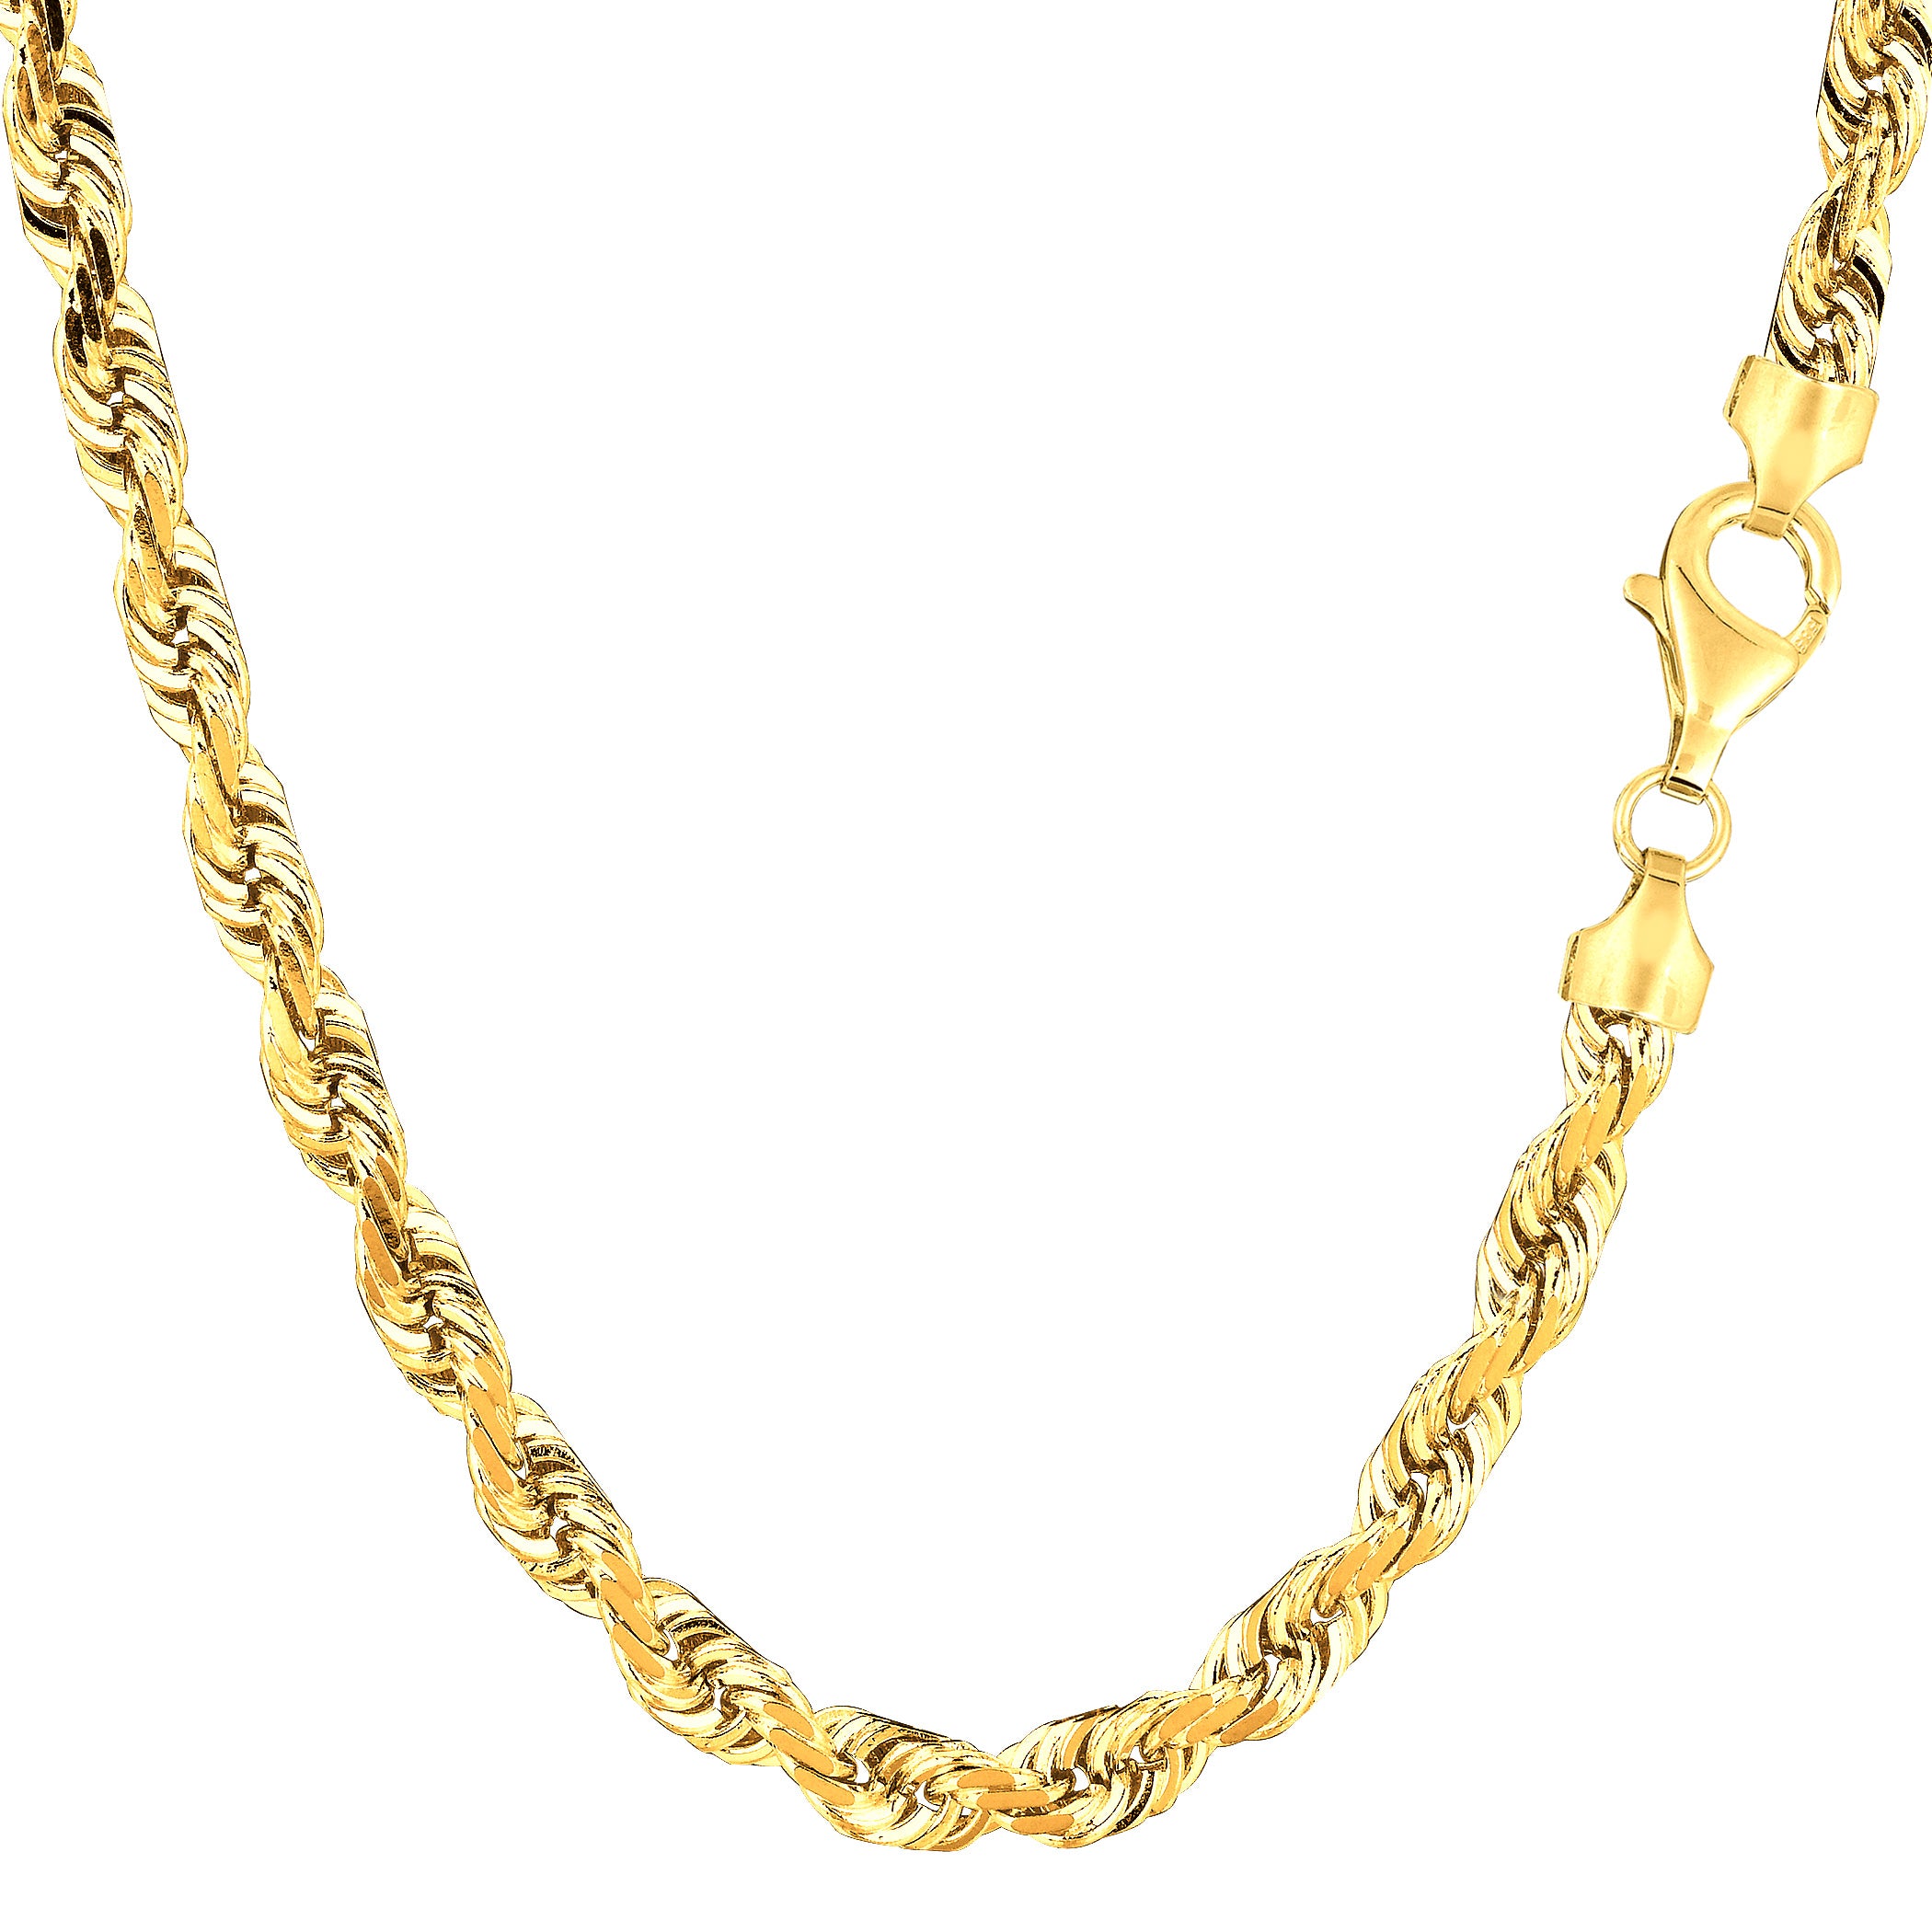 10k Yellow Solid Gold Diamond Cut Rope Chain Necklace, 5.0mm fine designer jewelry for men and women